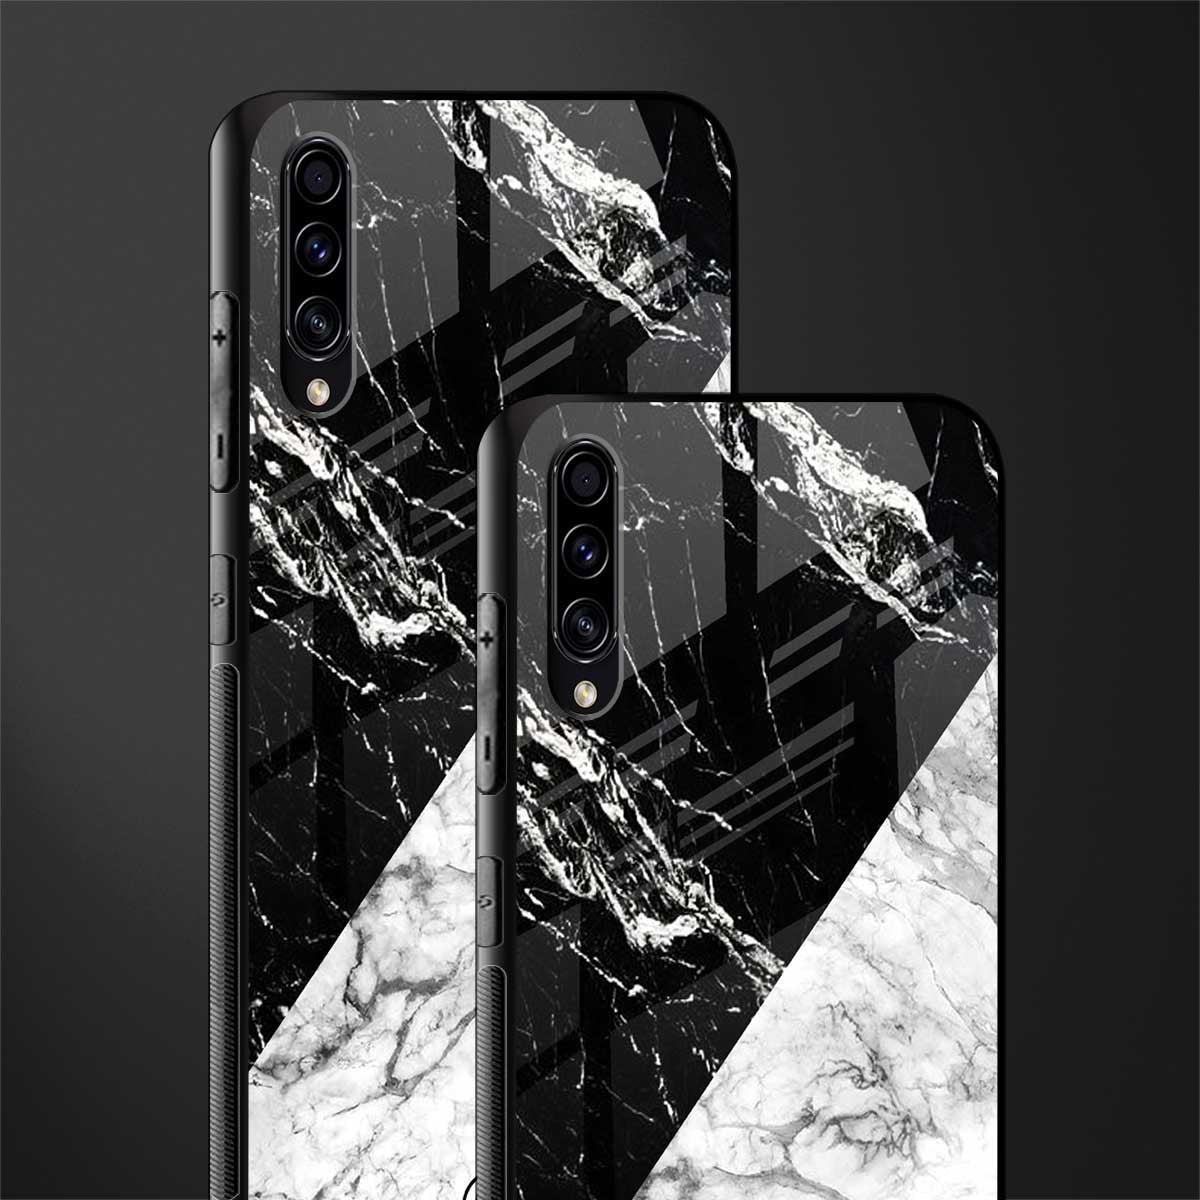 fatal contradiction phone cover for samsung galaxy a50